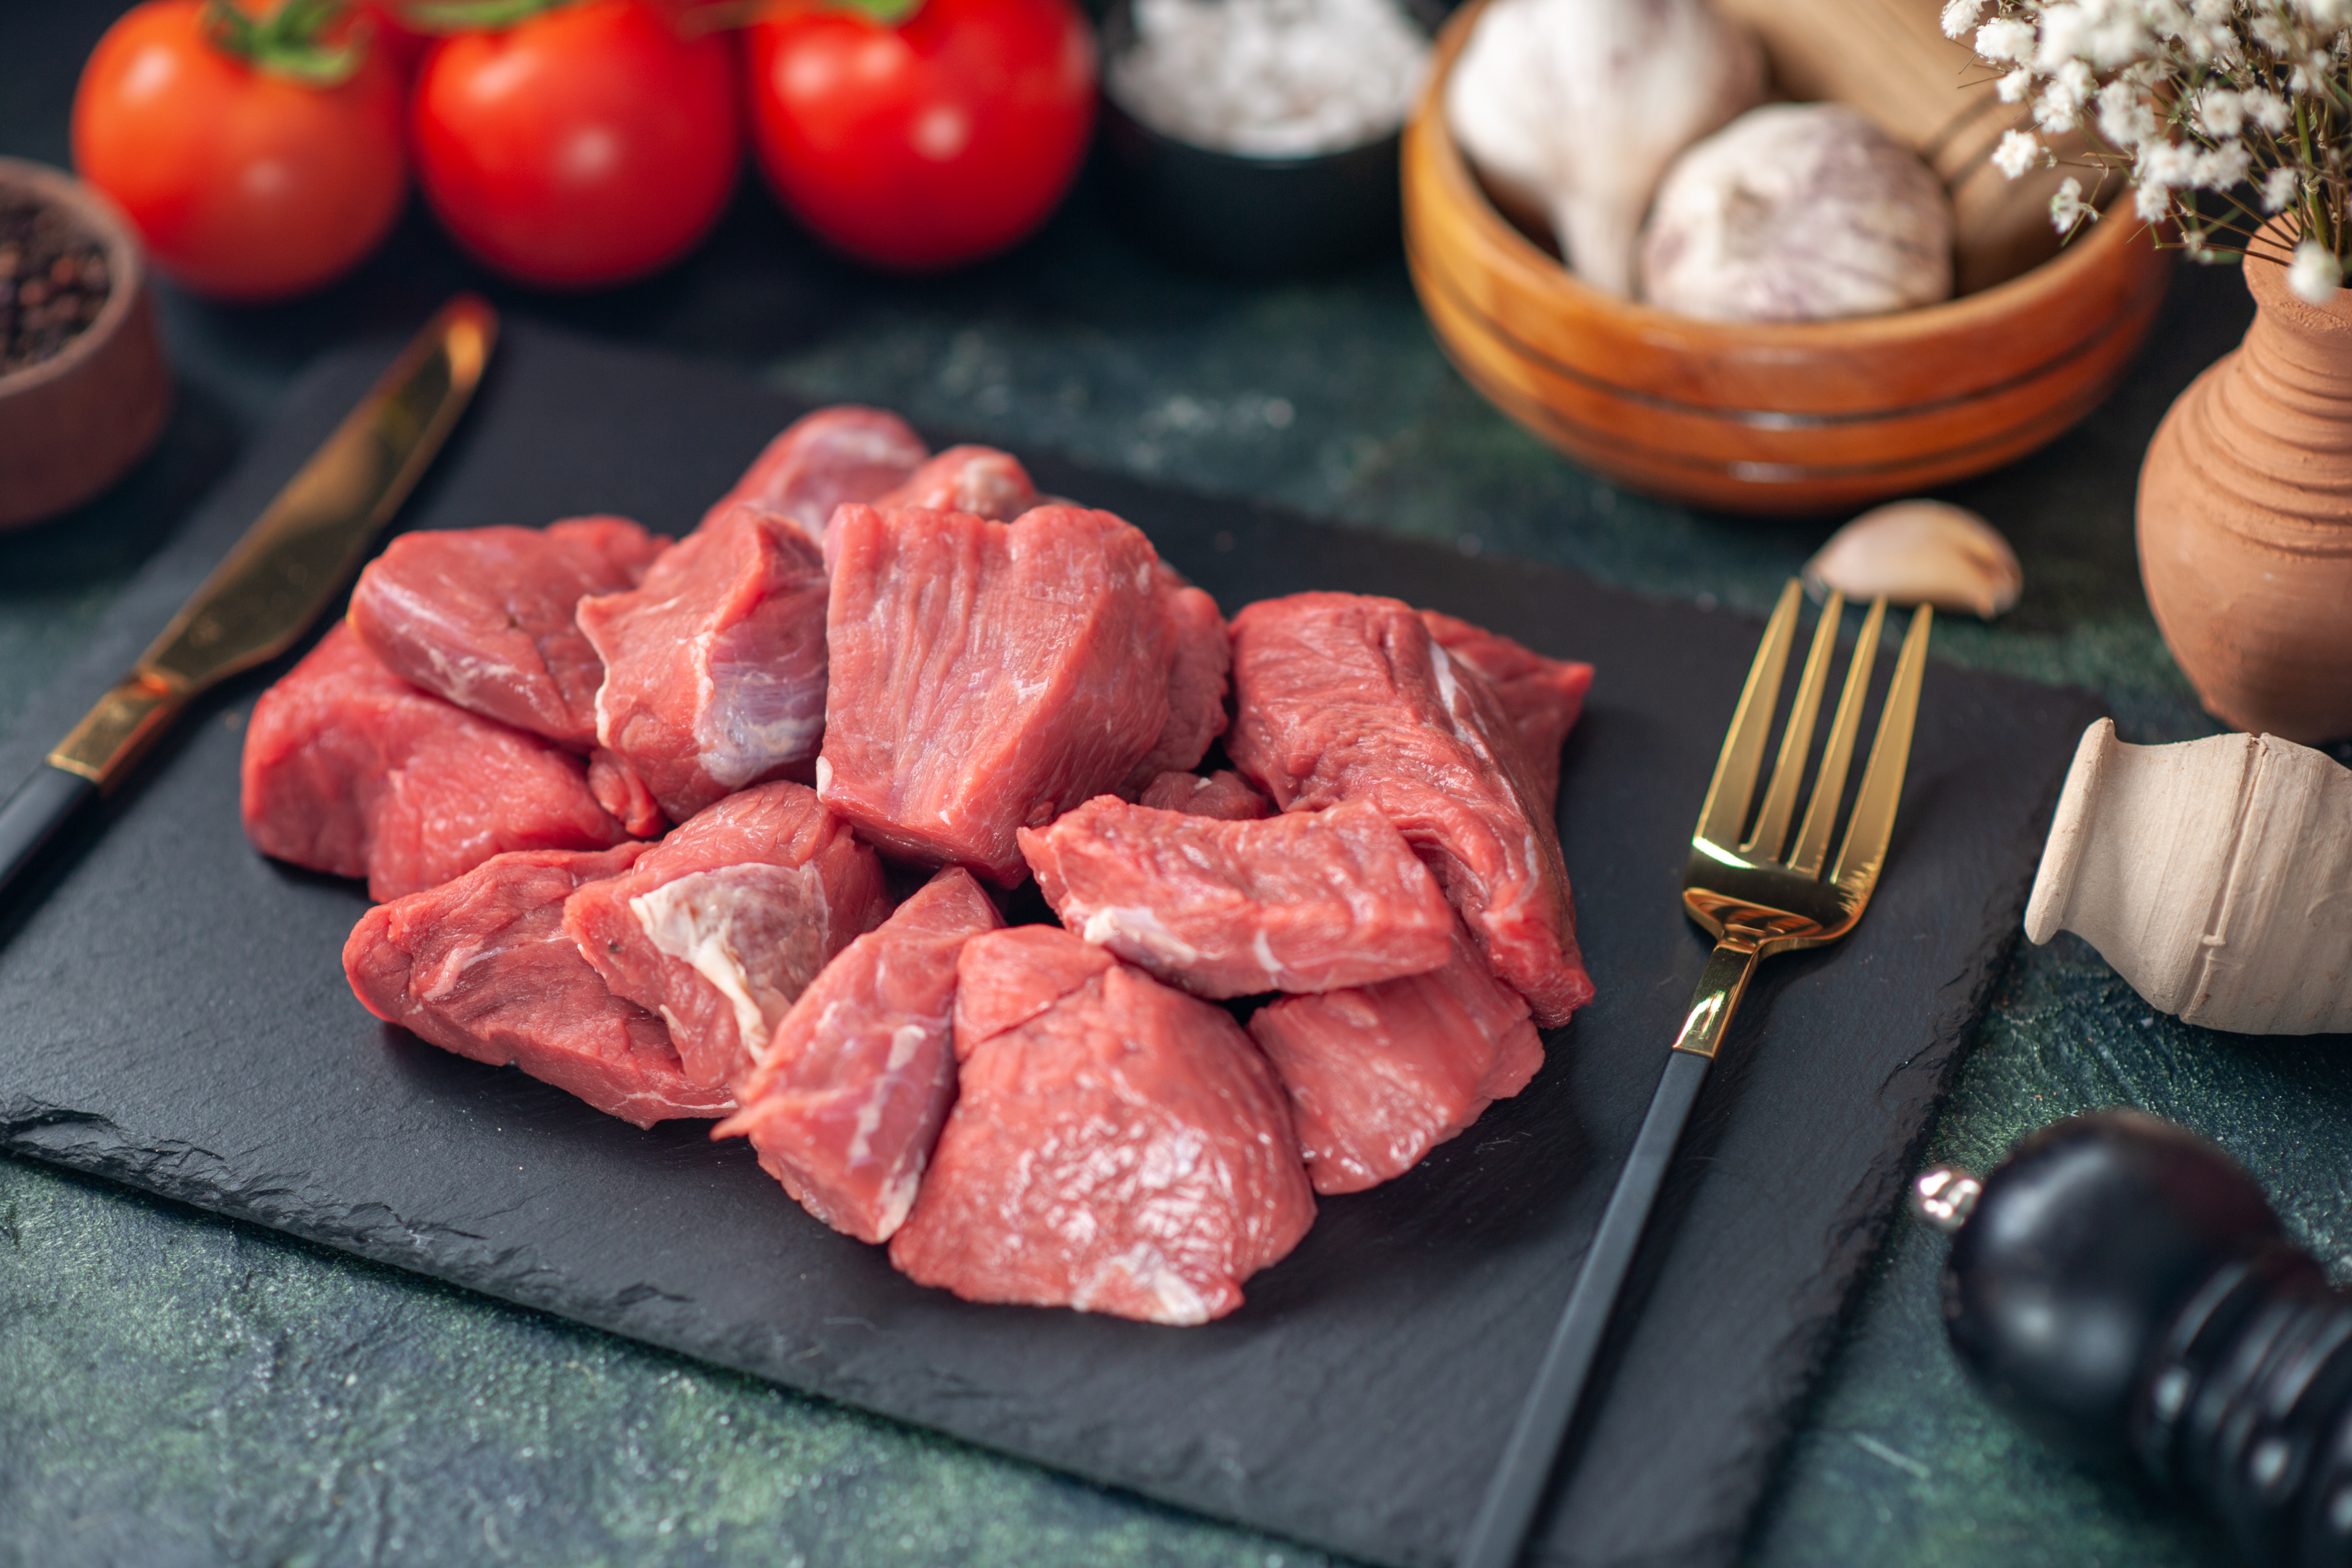 On medium heat brown the meat in olive oil and place into a large pot or slow cooker. Deglaze the pan with beef stock, beef bone broth or red wine and season with salt and pepper, Worcestershire sauce, a dash of balsamic vinegar, fresh herbs and more beef broth.